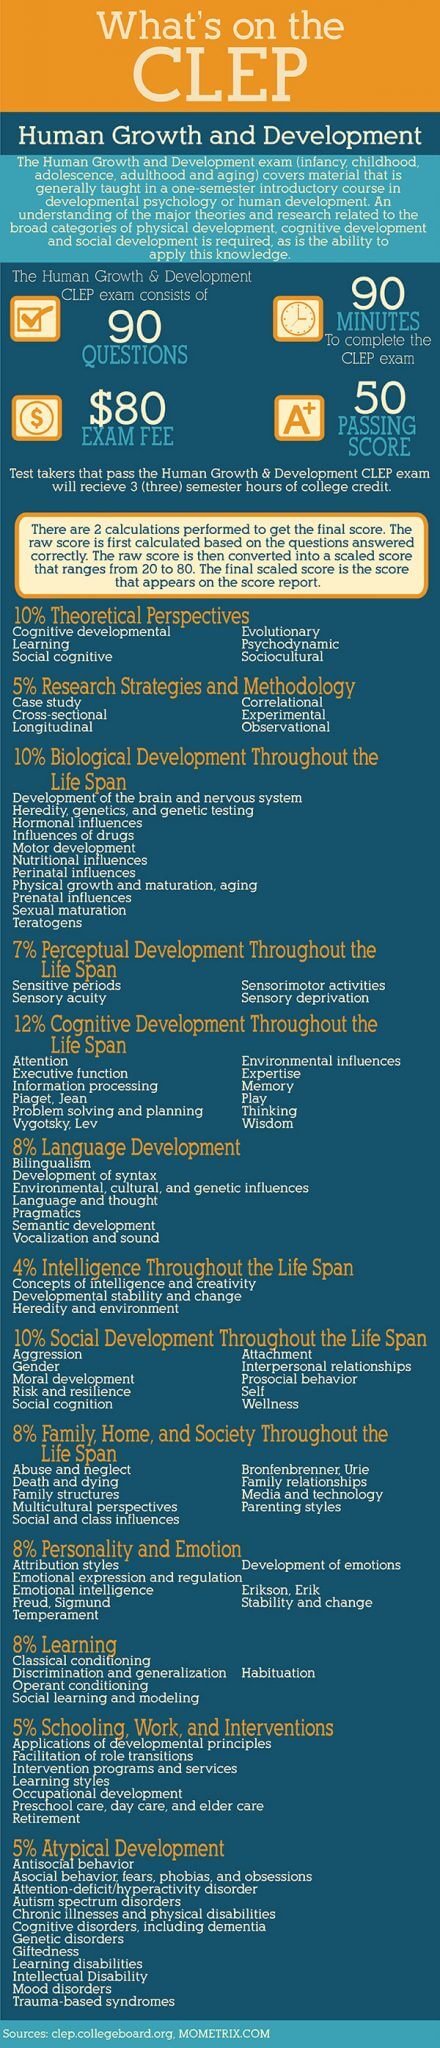 Infographic explaining Human Growth and Development CLEP test